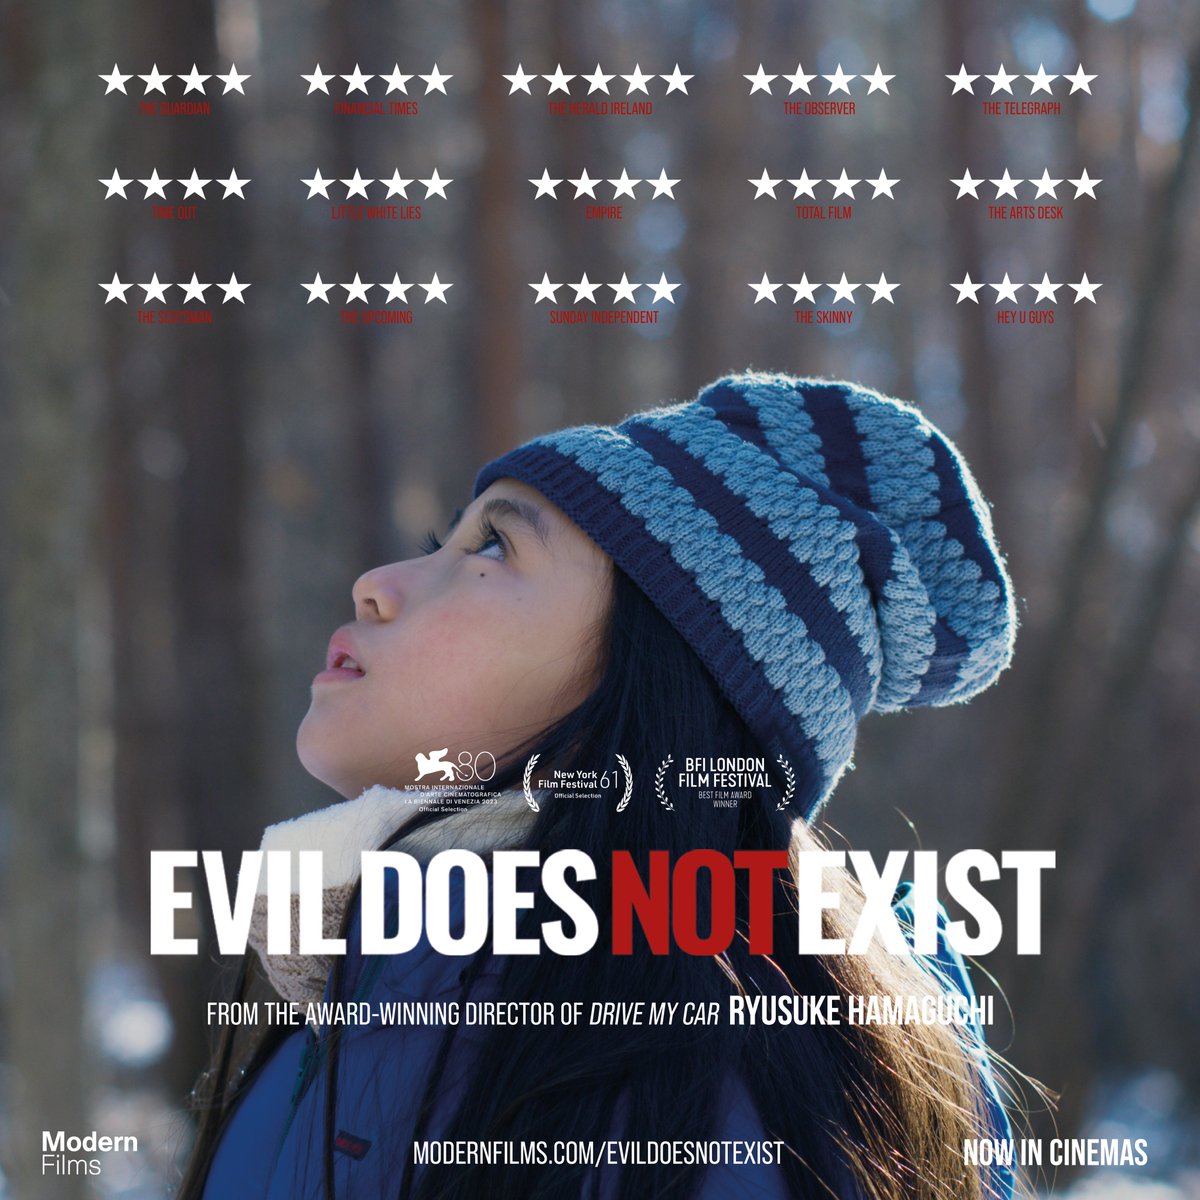 Ryusuke Hamaguchi’s EVIL DOES NOT EXIST continues to screen in cinemas nationwide! Urban ambitions clash with nature in a quiet village near Tokyo in this eco-fable from the Oscar® and BAFTA-winning director of Drive My Car. Find a screening near you: modernfilms.com/evildoesnotexi…